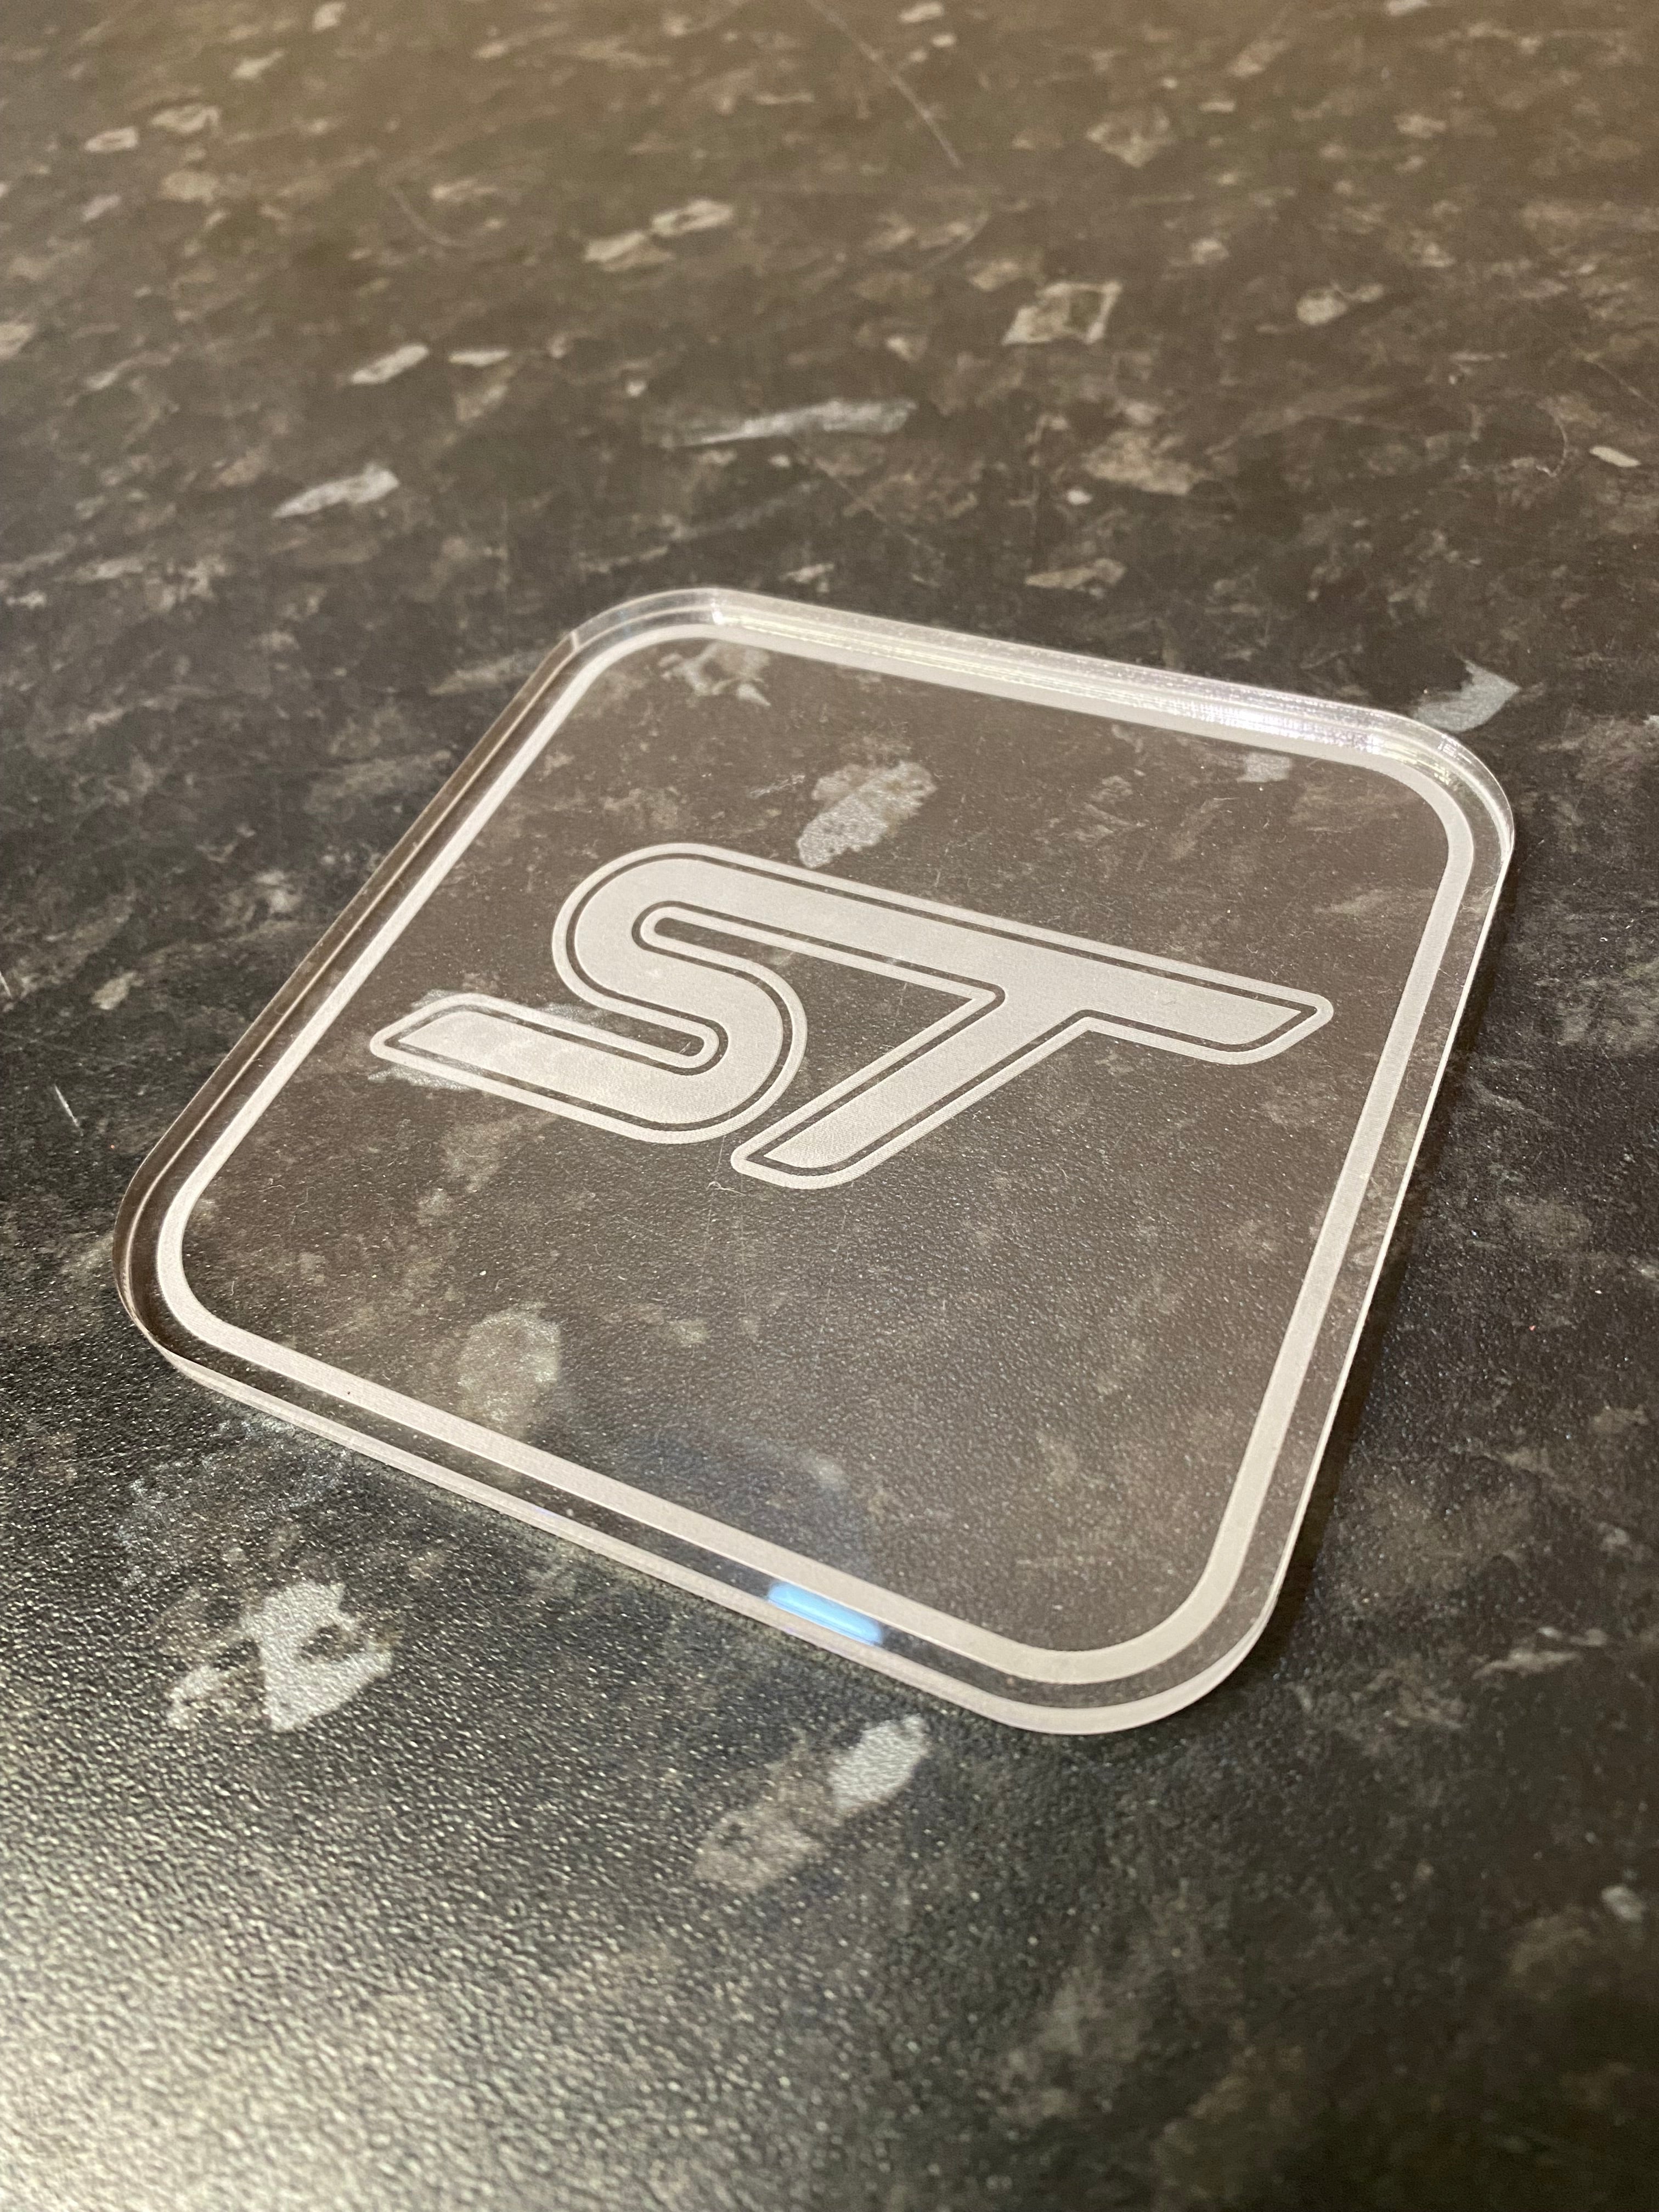 Engraved Drinks Coaster - RS / ST Logos